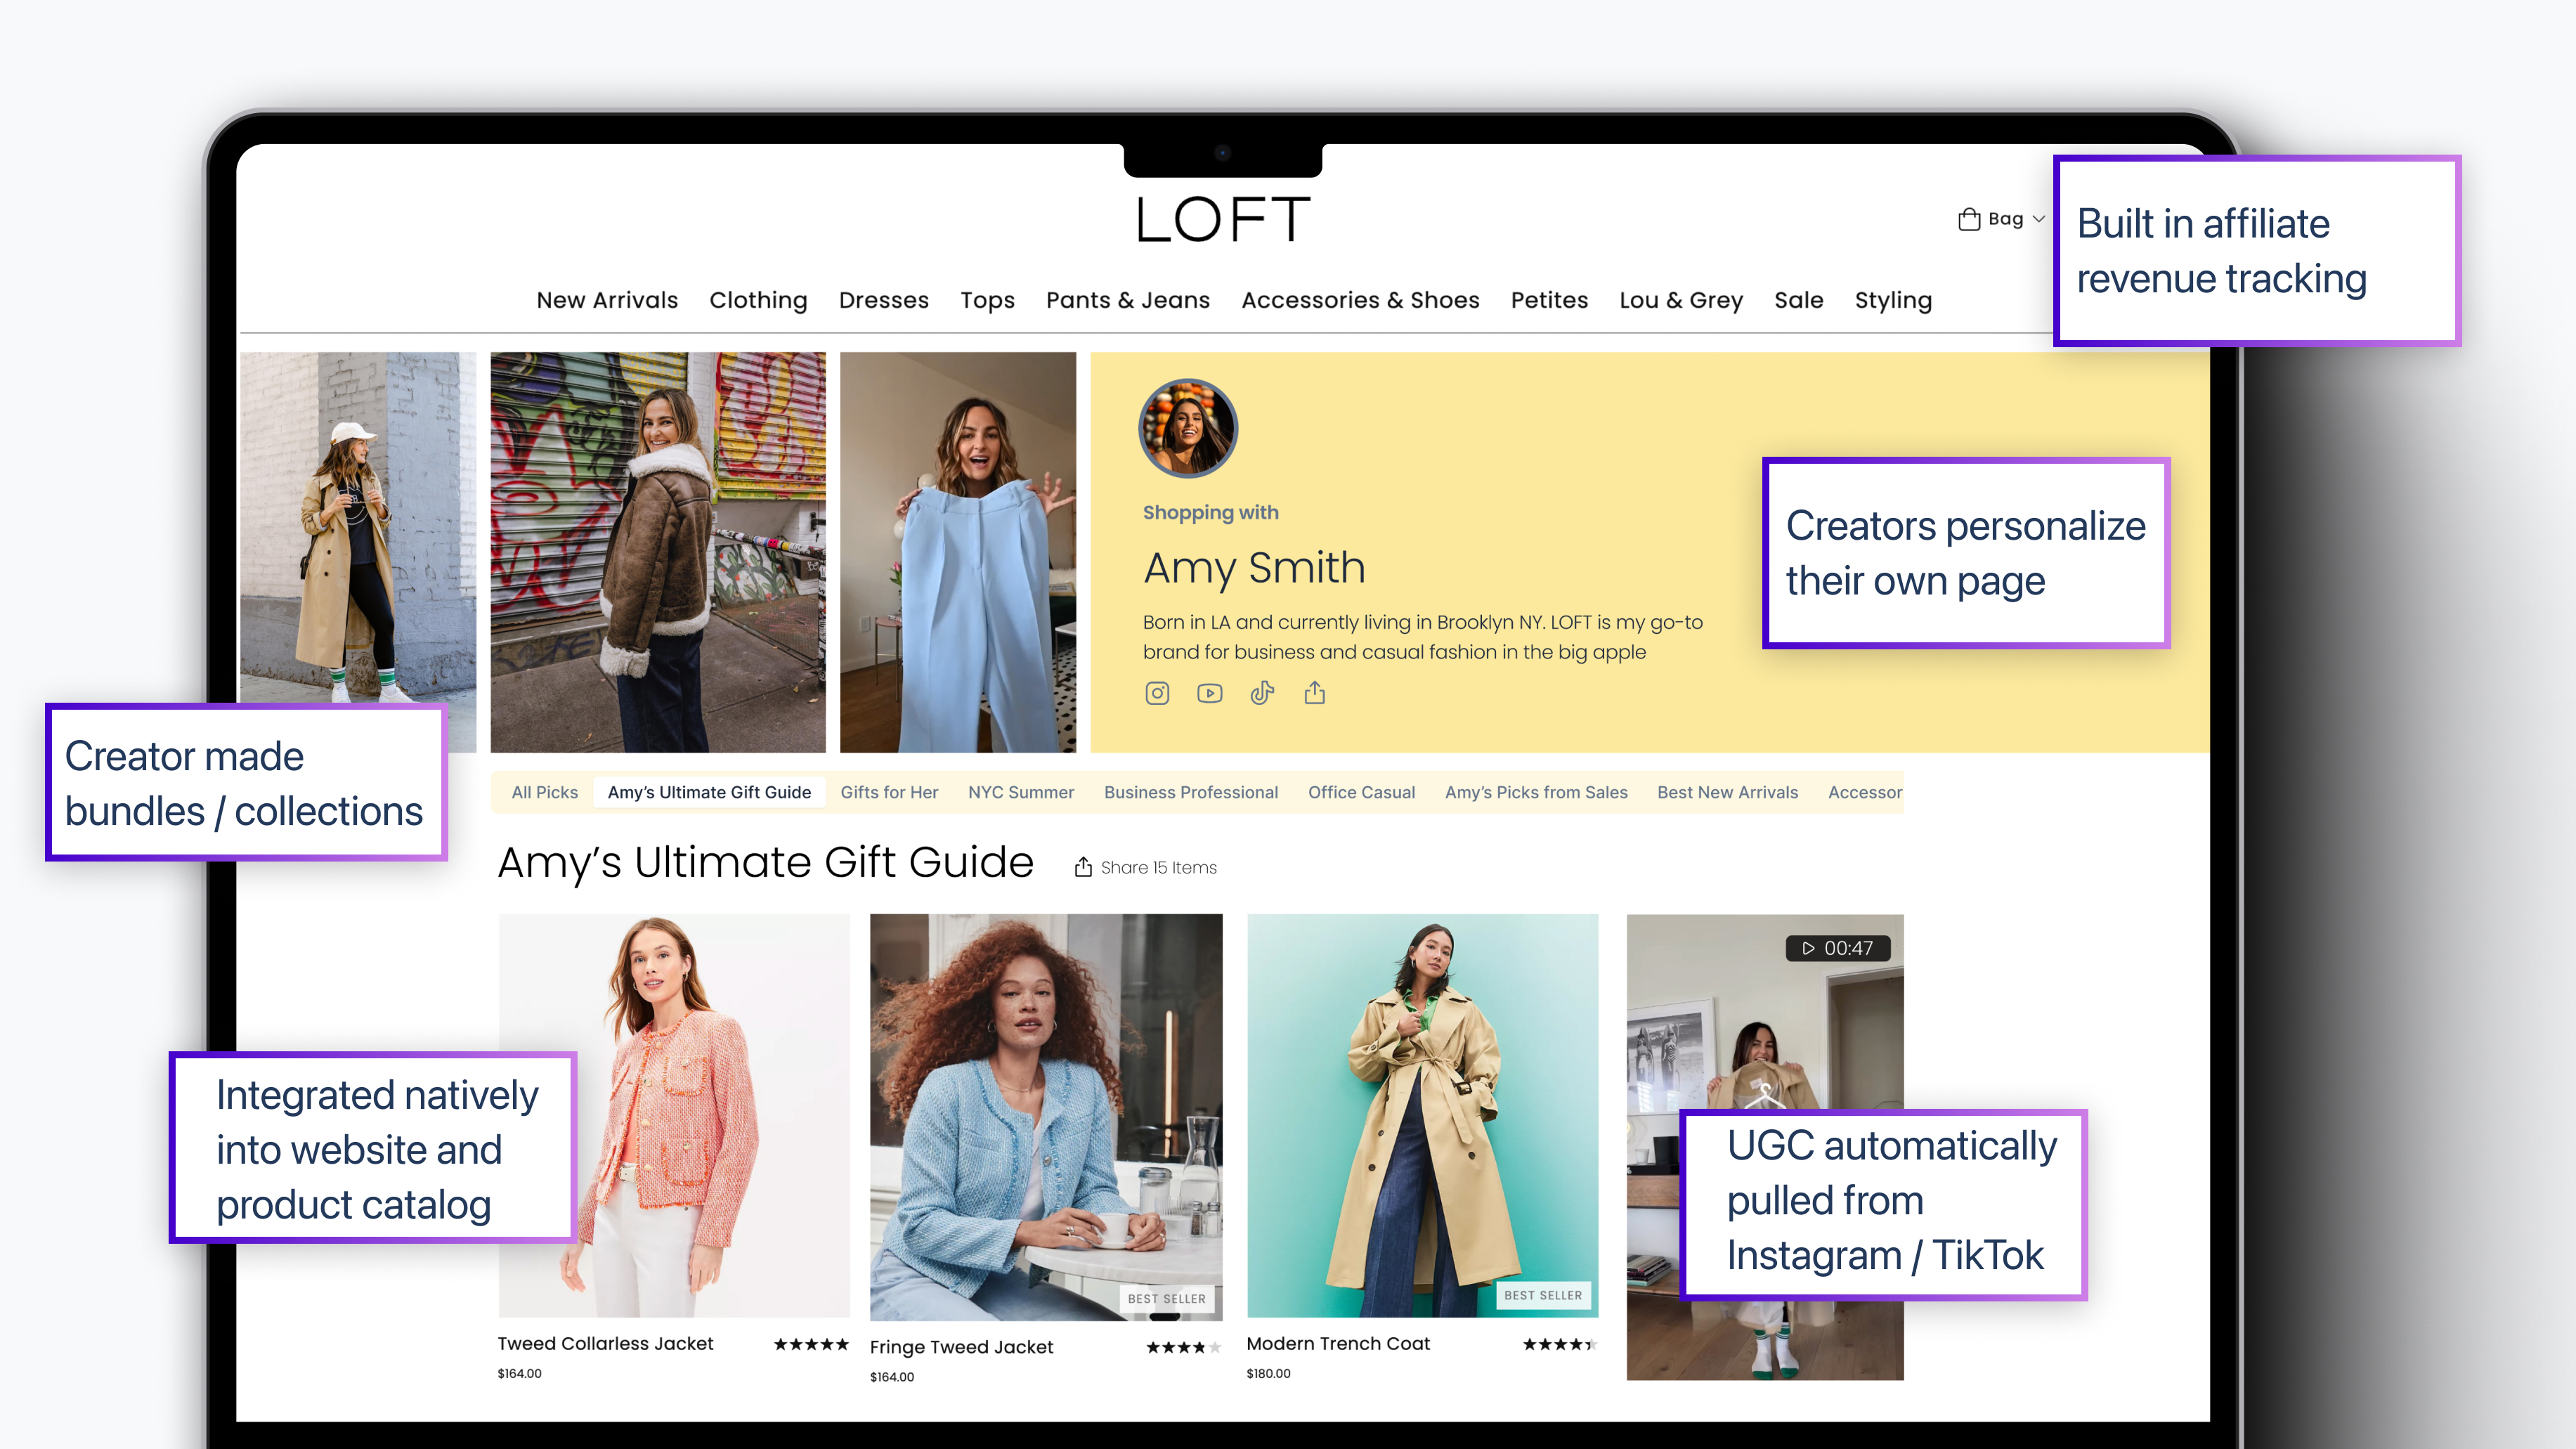 Creator Storefronts allow for:
- Extensive creator personalization
- Creator made bundles / collections
- Native integration into website and product catalog
- Automatically render UGC from Instagram / TikTok
- Revenue tracking and commission payouts